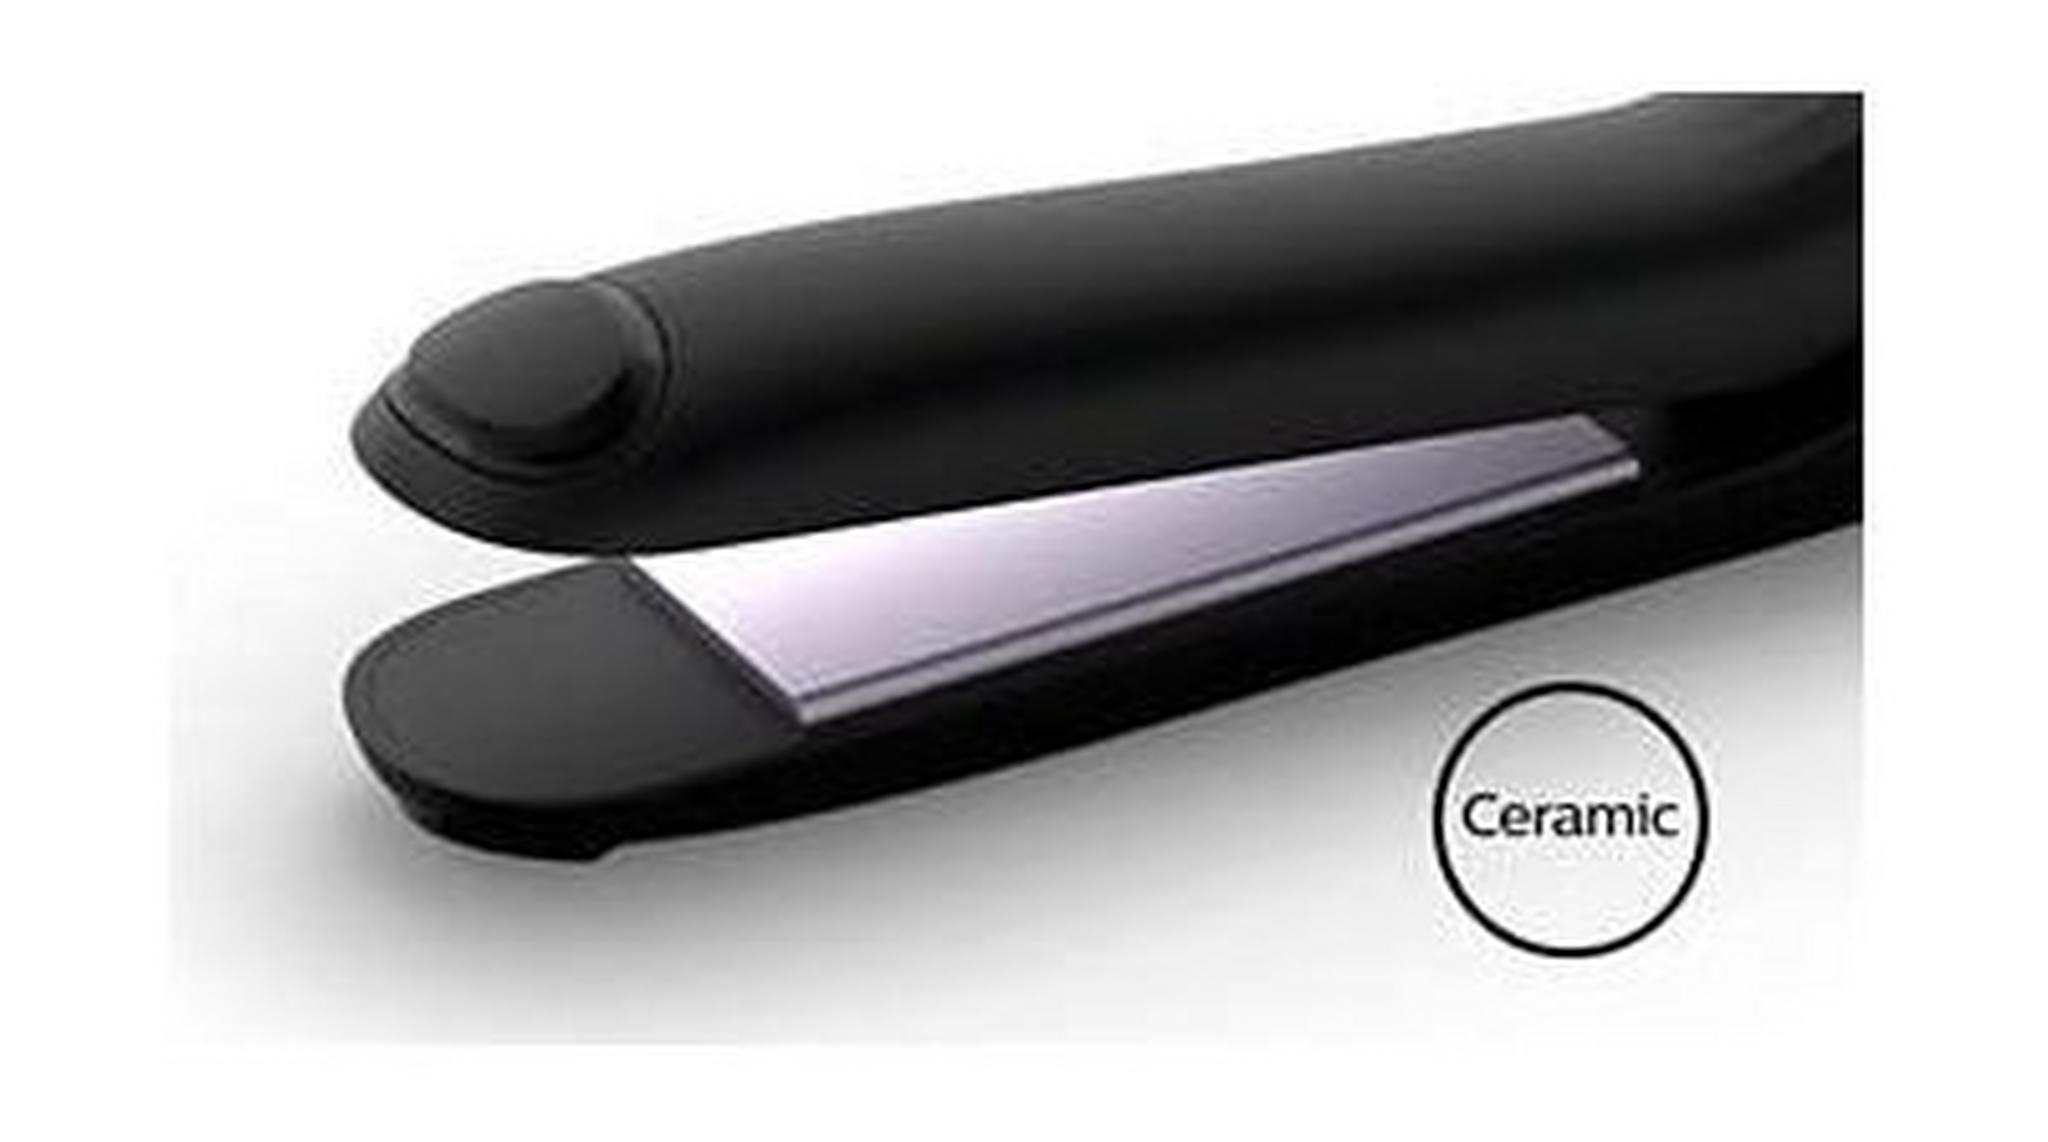 Philips 2 in 1 Straightener & Curler for Easy Hairstyling with Ceramic Coating, 5 Attachments, BHH811/03 - Black